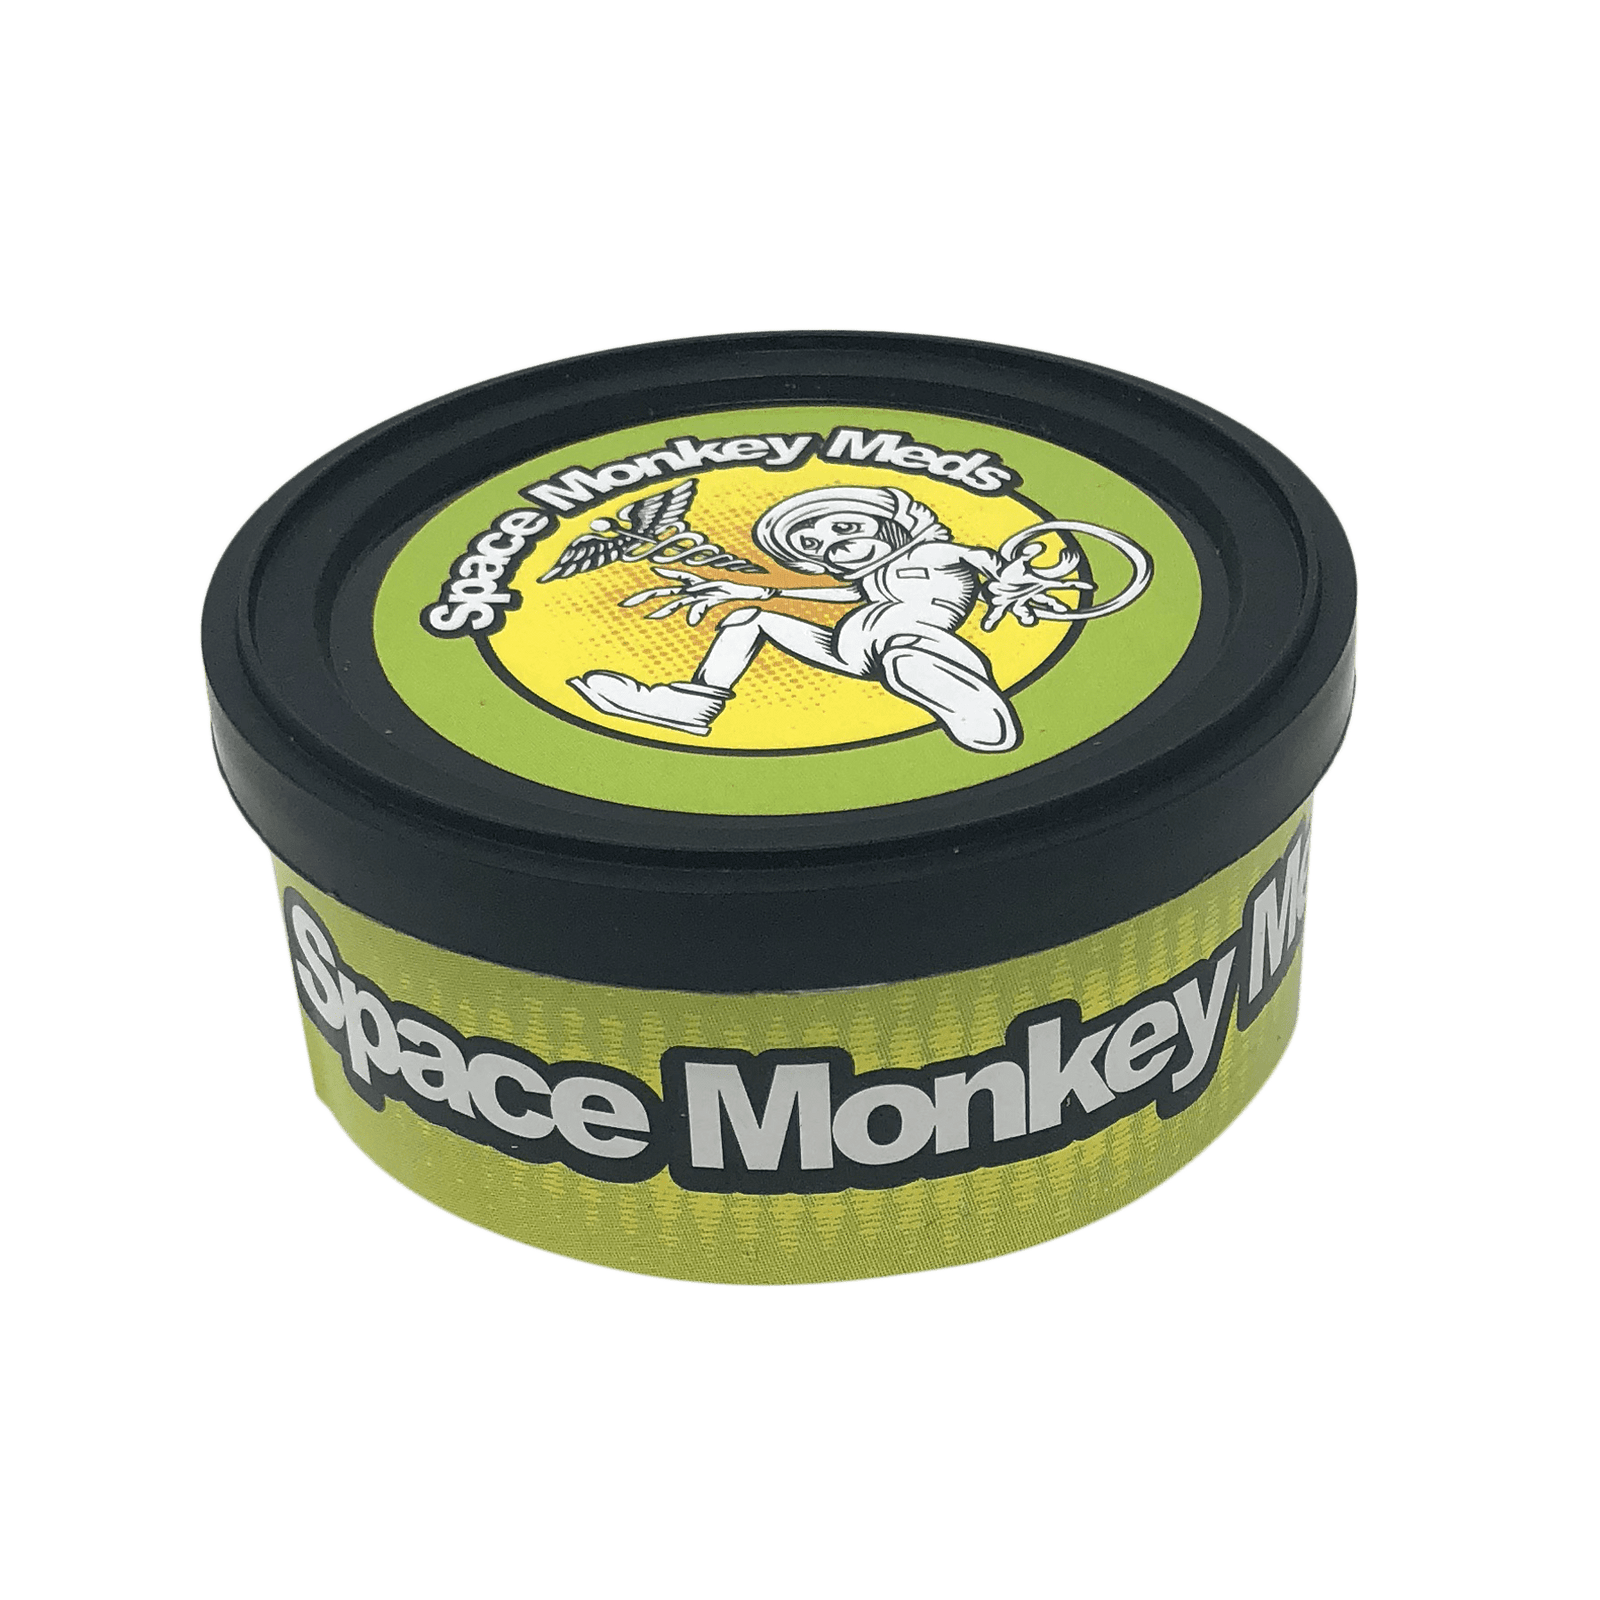 Space Monkey Meds Extreme Cream #4 - The Balloon Room